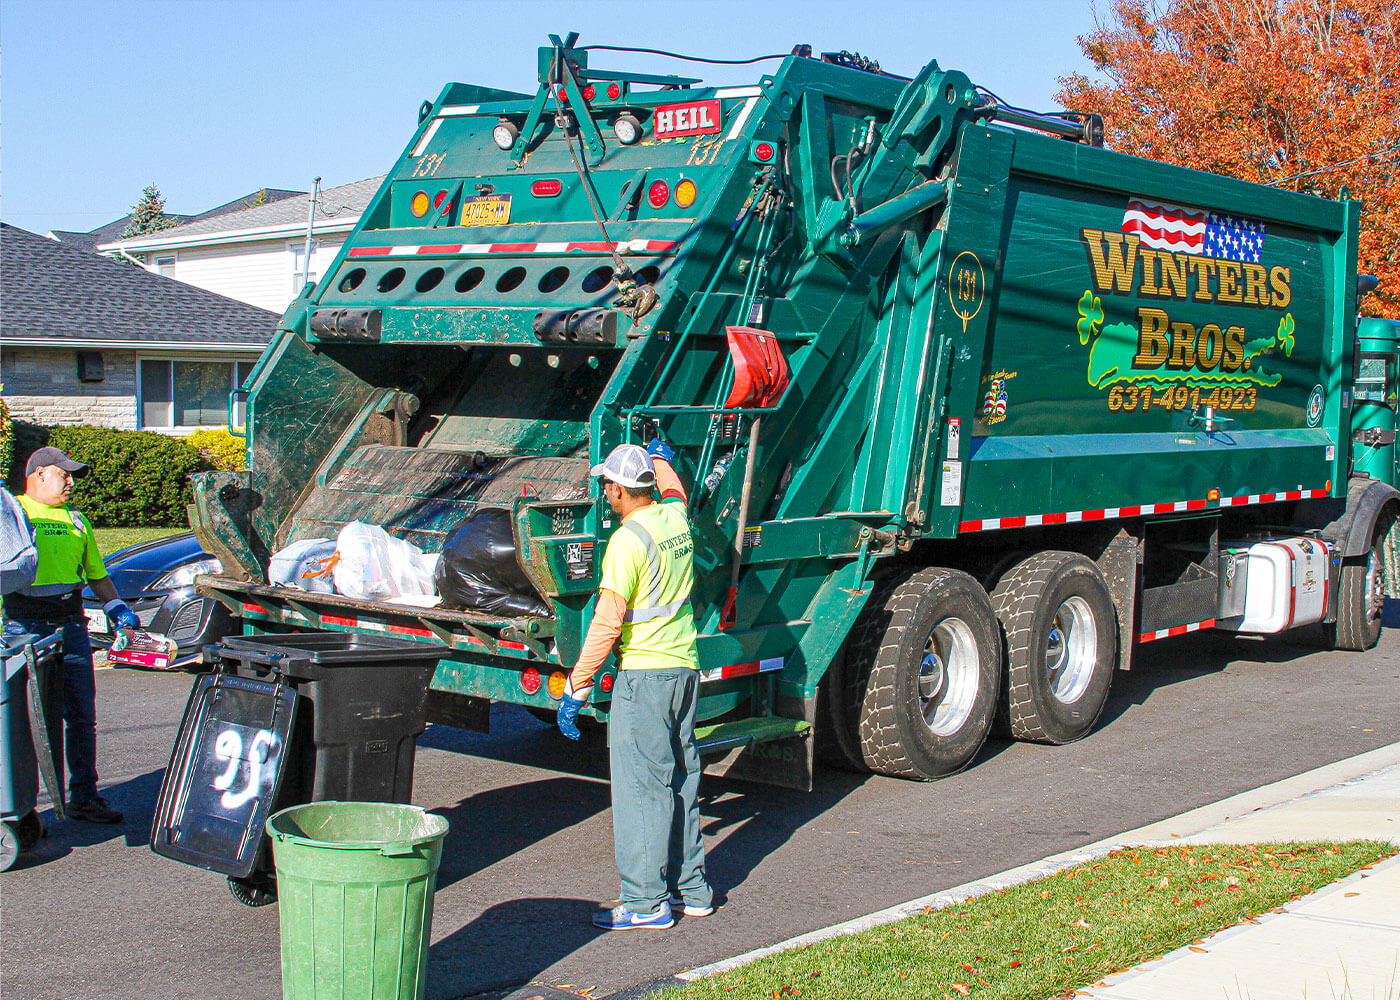 Commercial Rear Load Garbage Truck Winter Bros